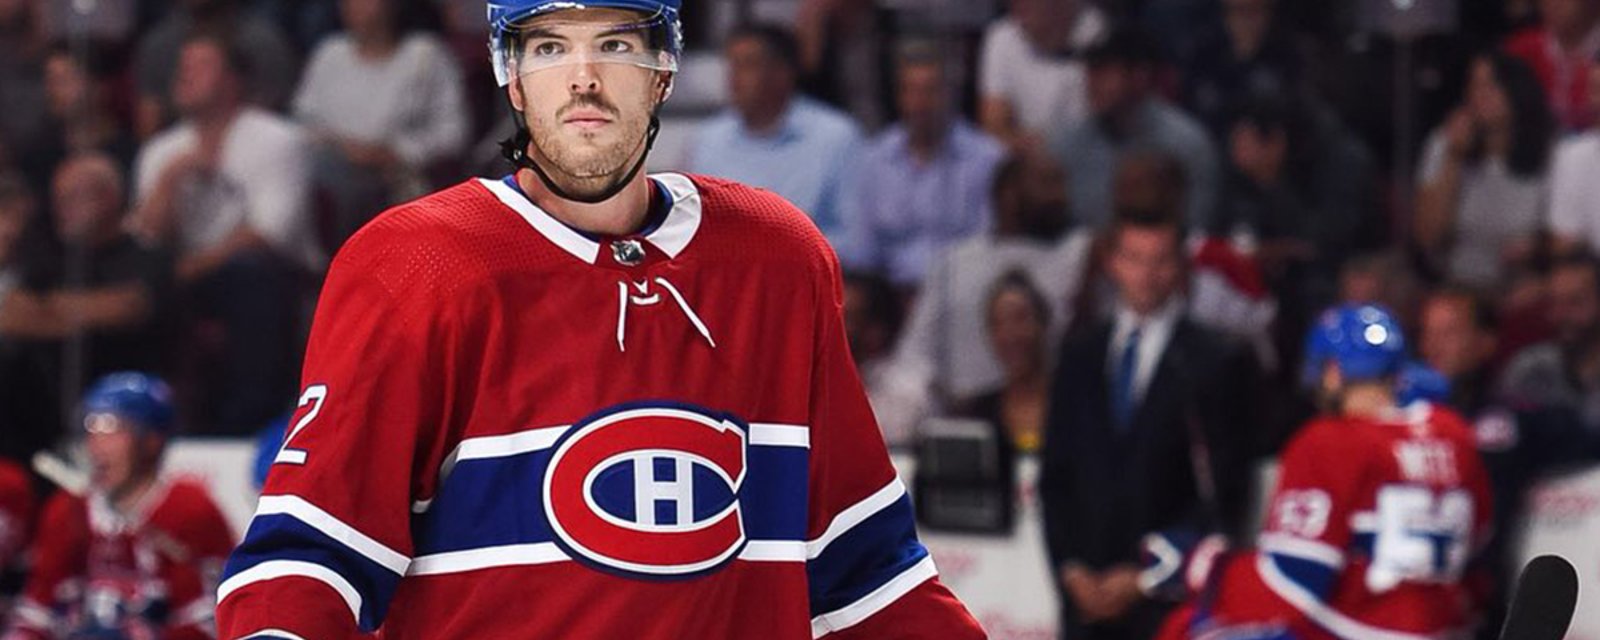 Report: Former 1st round draft pick turns down contract offer from Habs